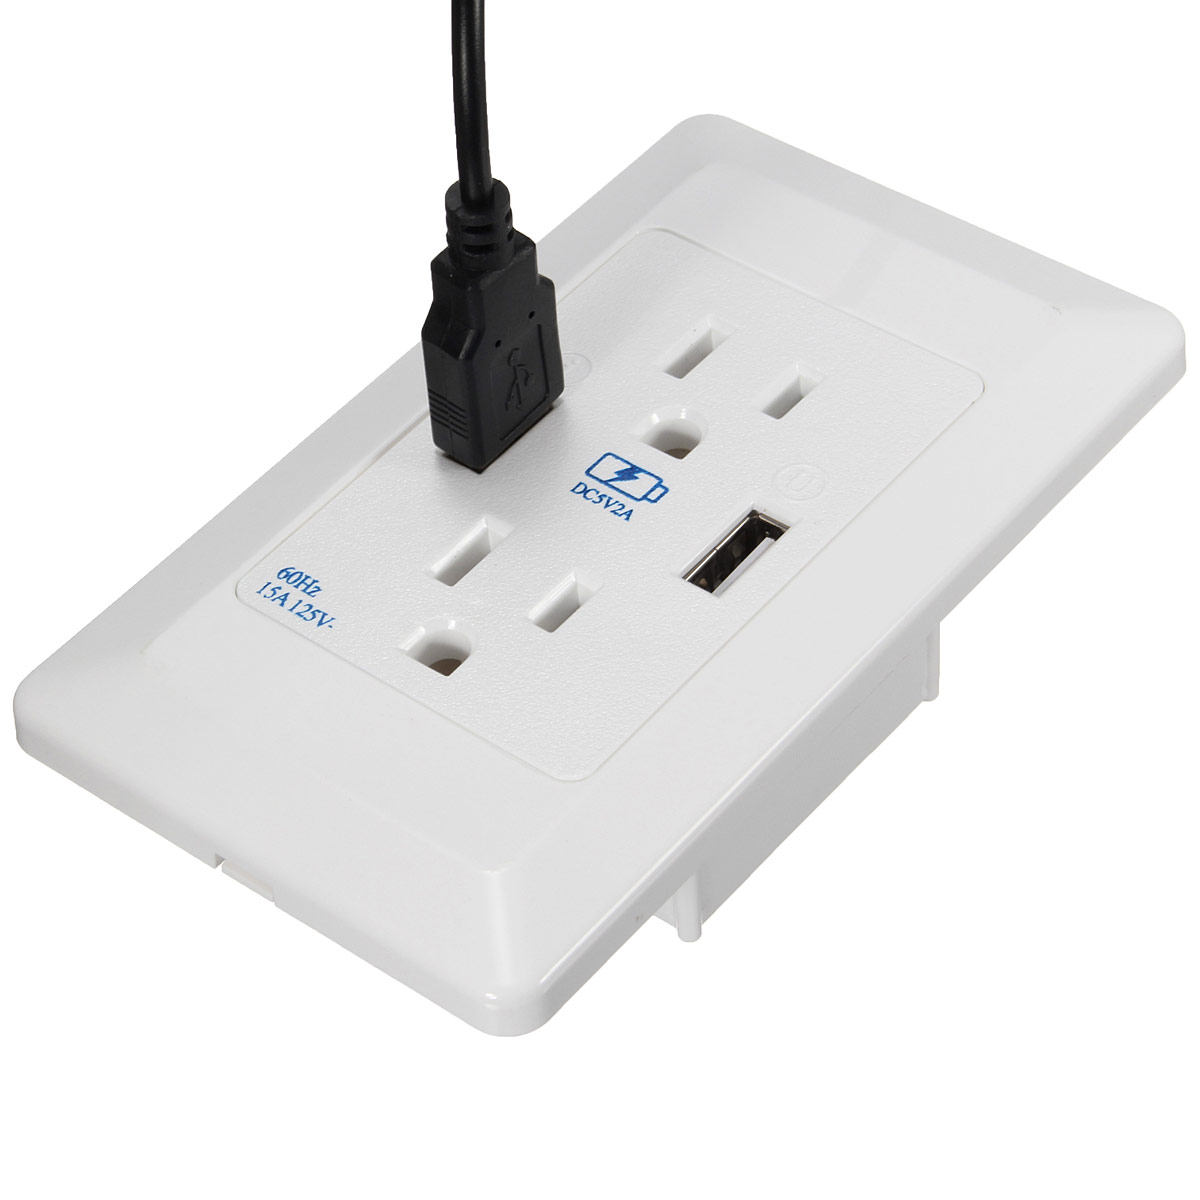 AC-Wall-Socket-Power-Adapter-Receptacle-2-Port-USB-Charger-Panel-Outlet-Plate-1951337-4